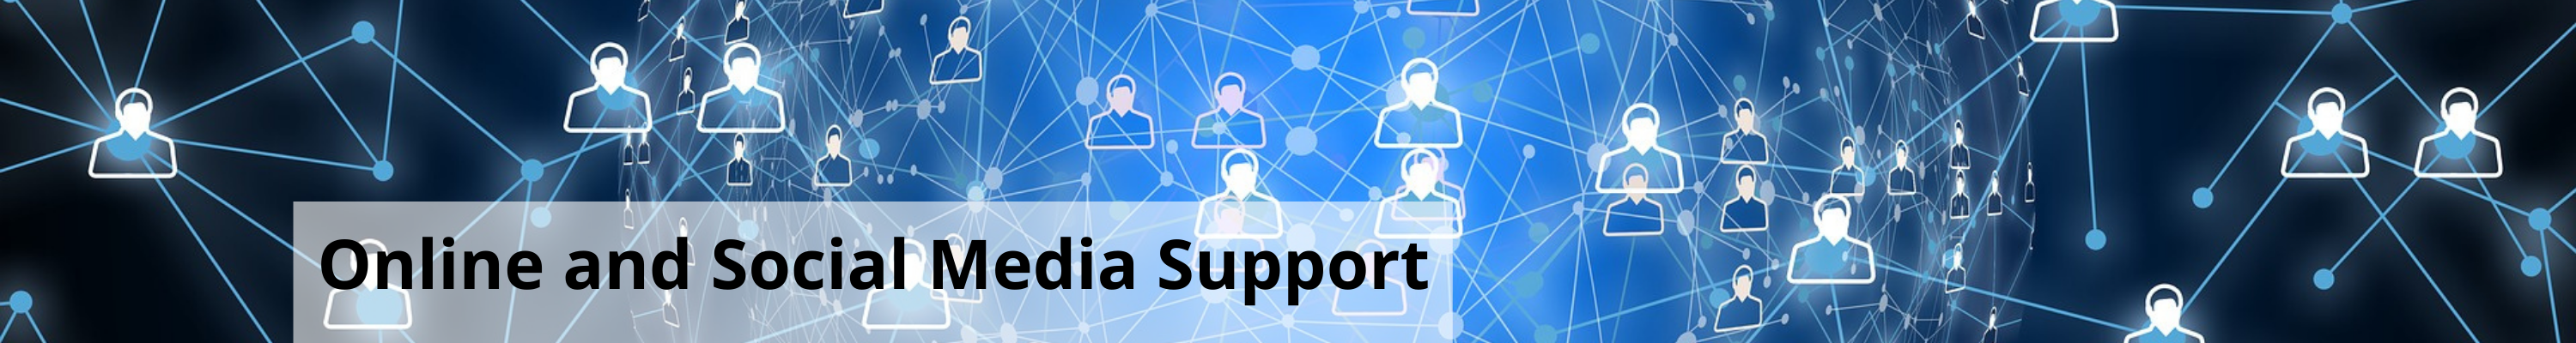 Online and Social Media Support